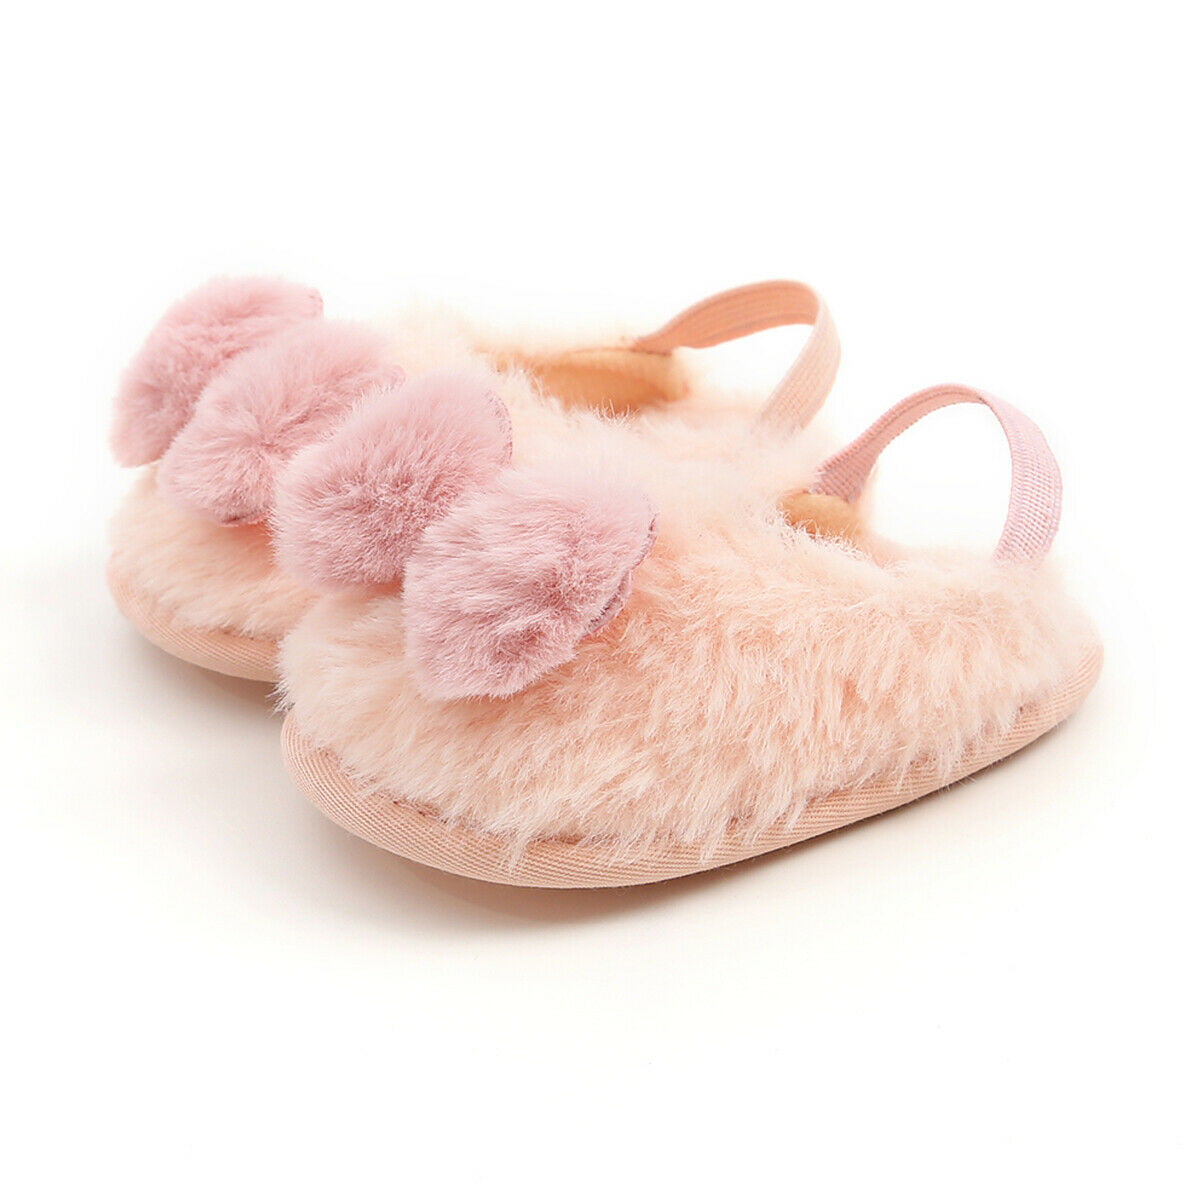 NEW Toddler Girl's Plush Slippers Light Pink with Hearts and Bow